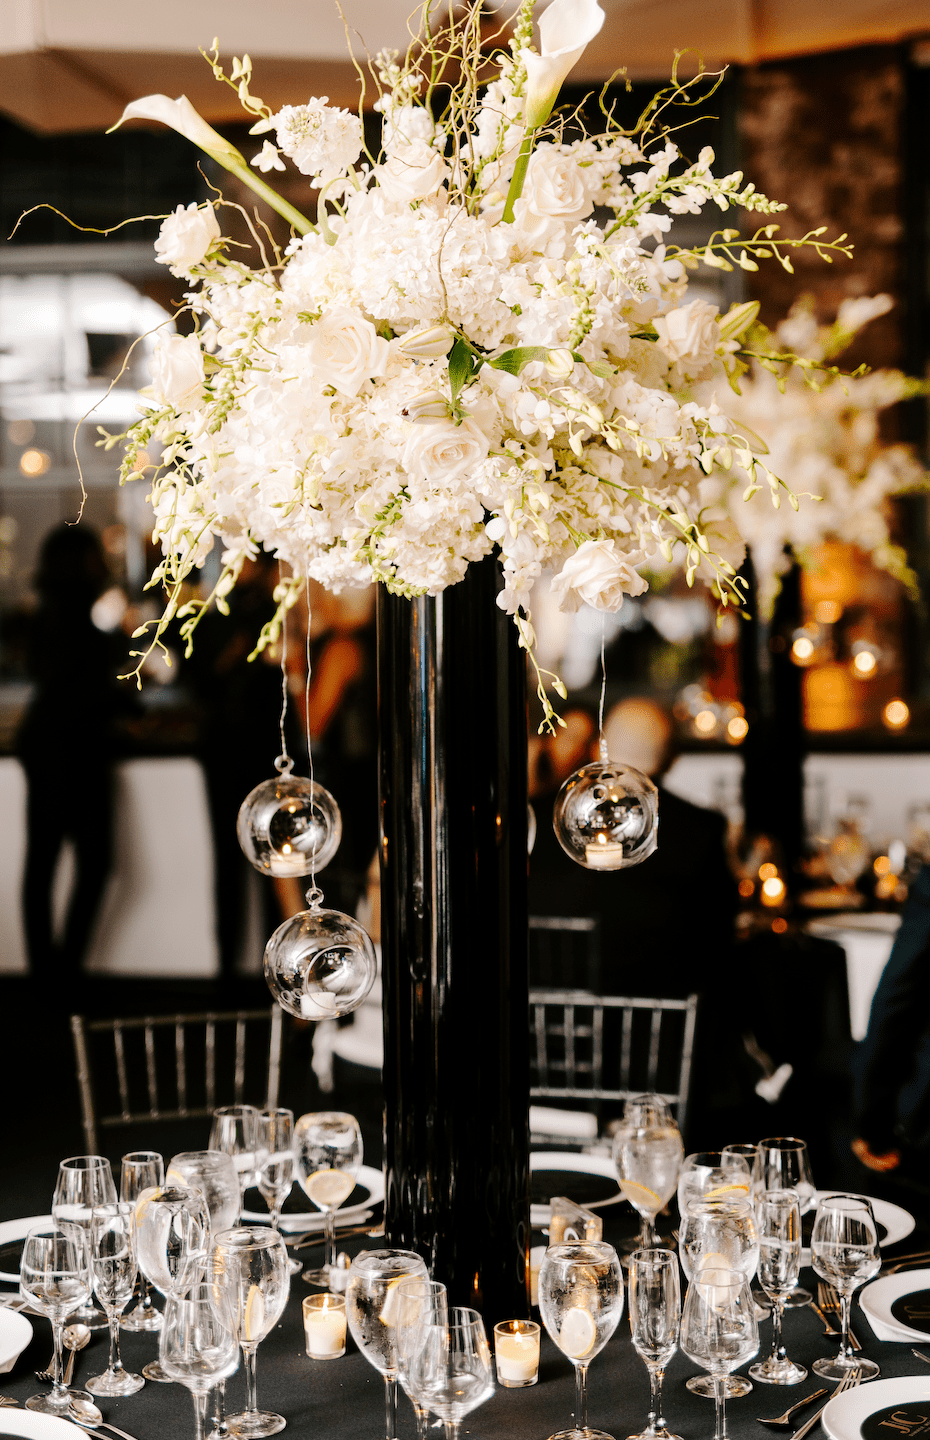 Tall black vase with white floral centerpiece and hanging glass globes with votive candles on black table